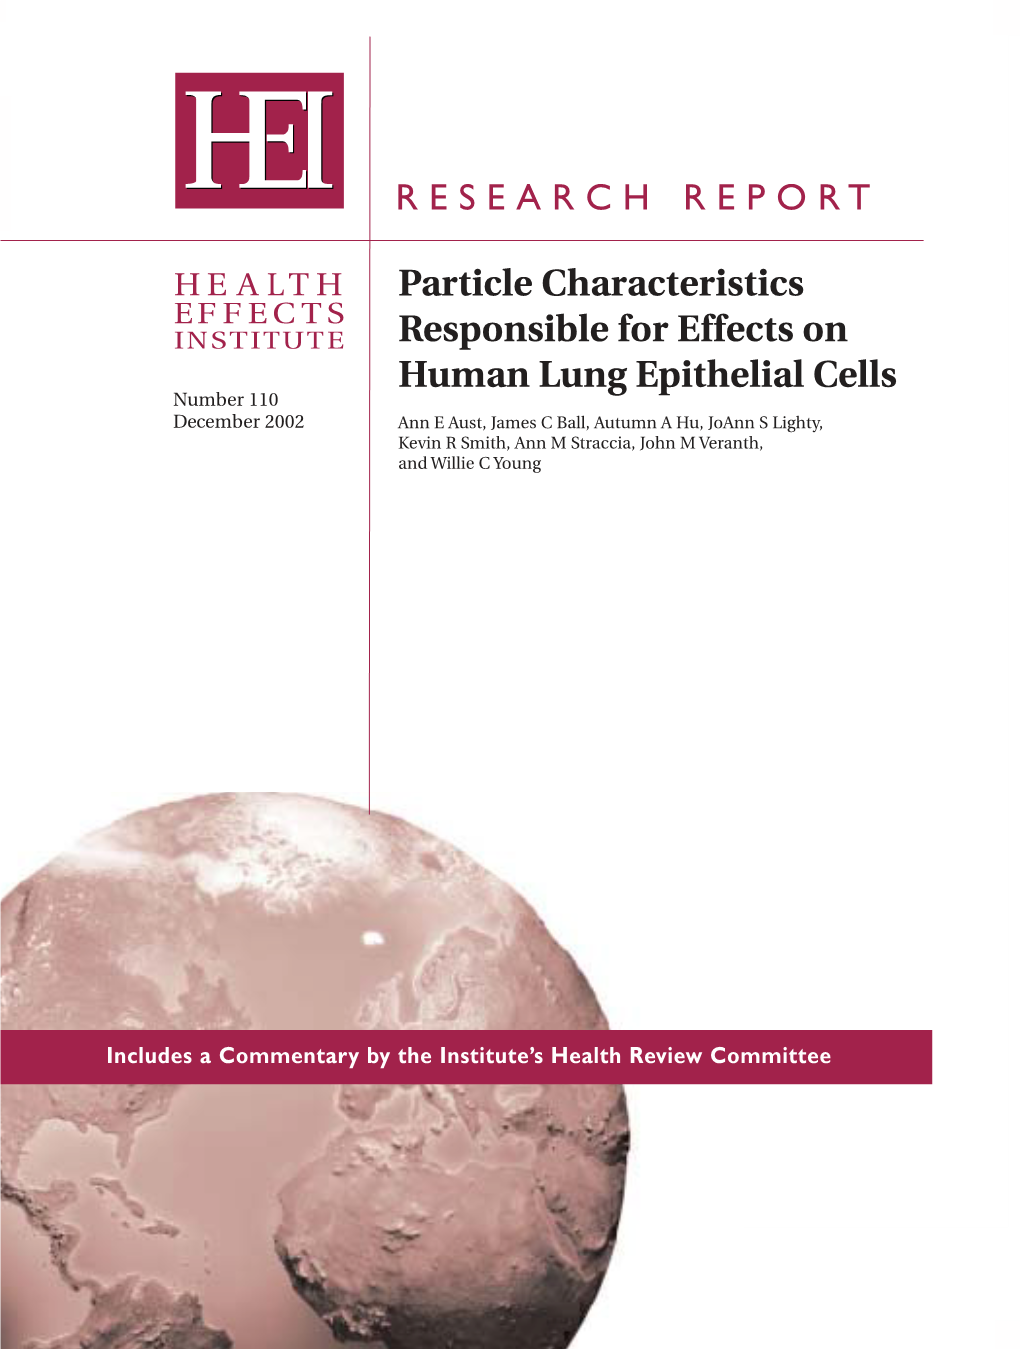 RESEARCH REPORT Particle Characteristics Responsible for Effects on Human Lung Epithelial Cells